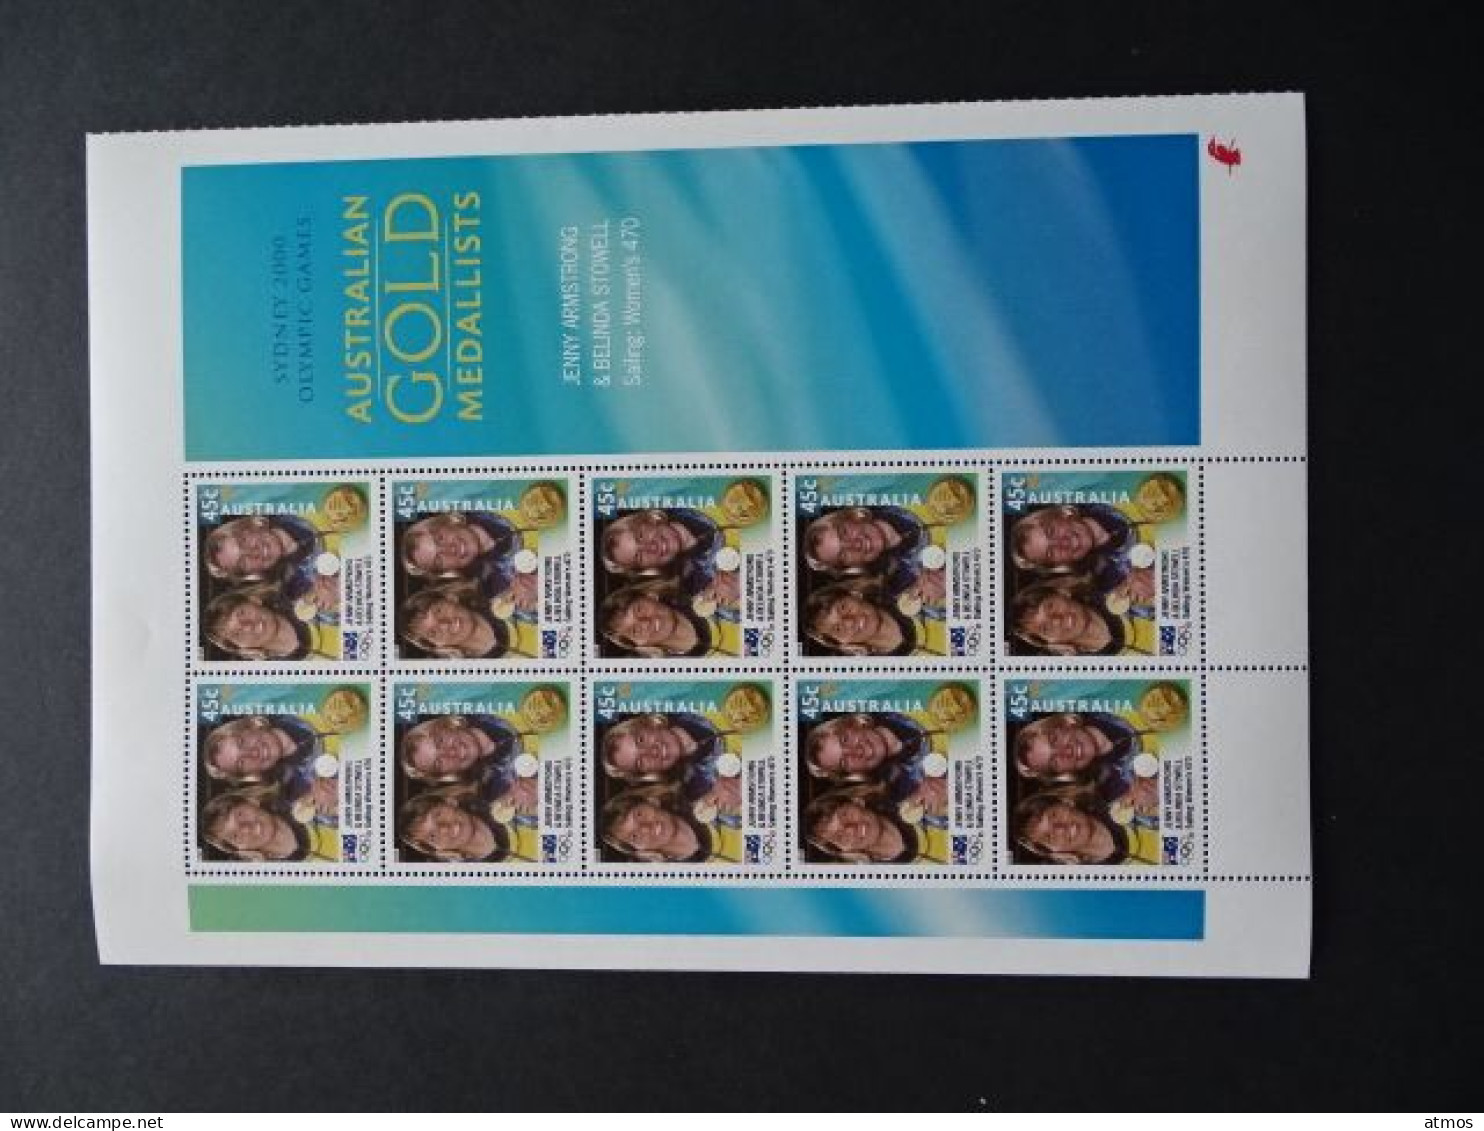 Australia MNH Michel Nr 1987 Sheet Of 10 From 2000 ACT - Neufs